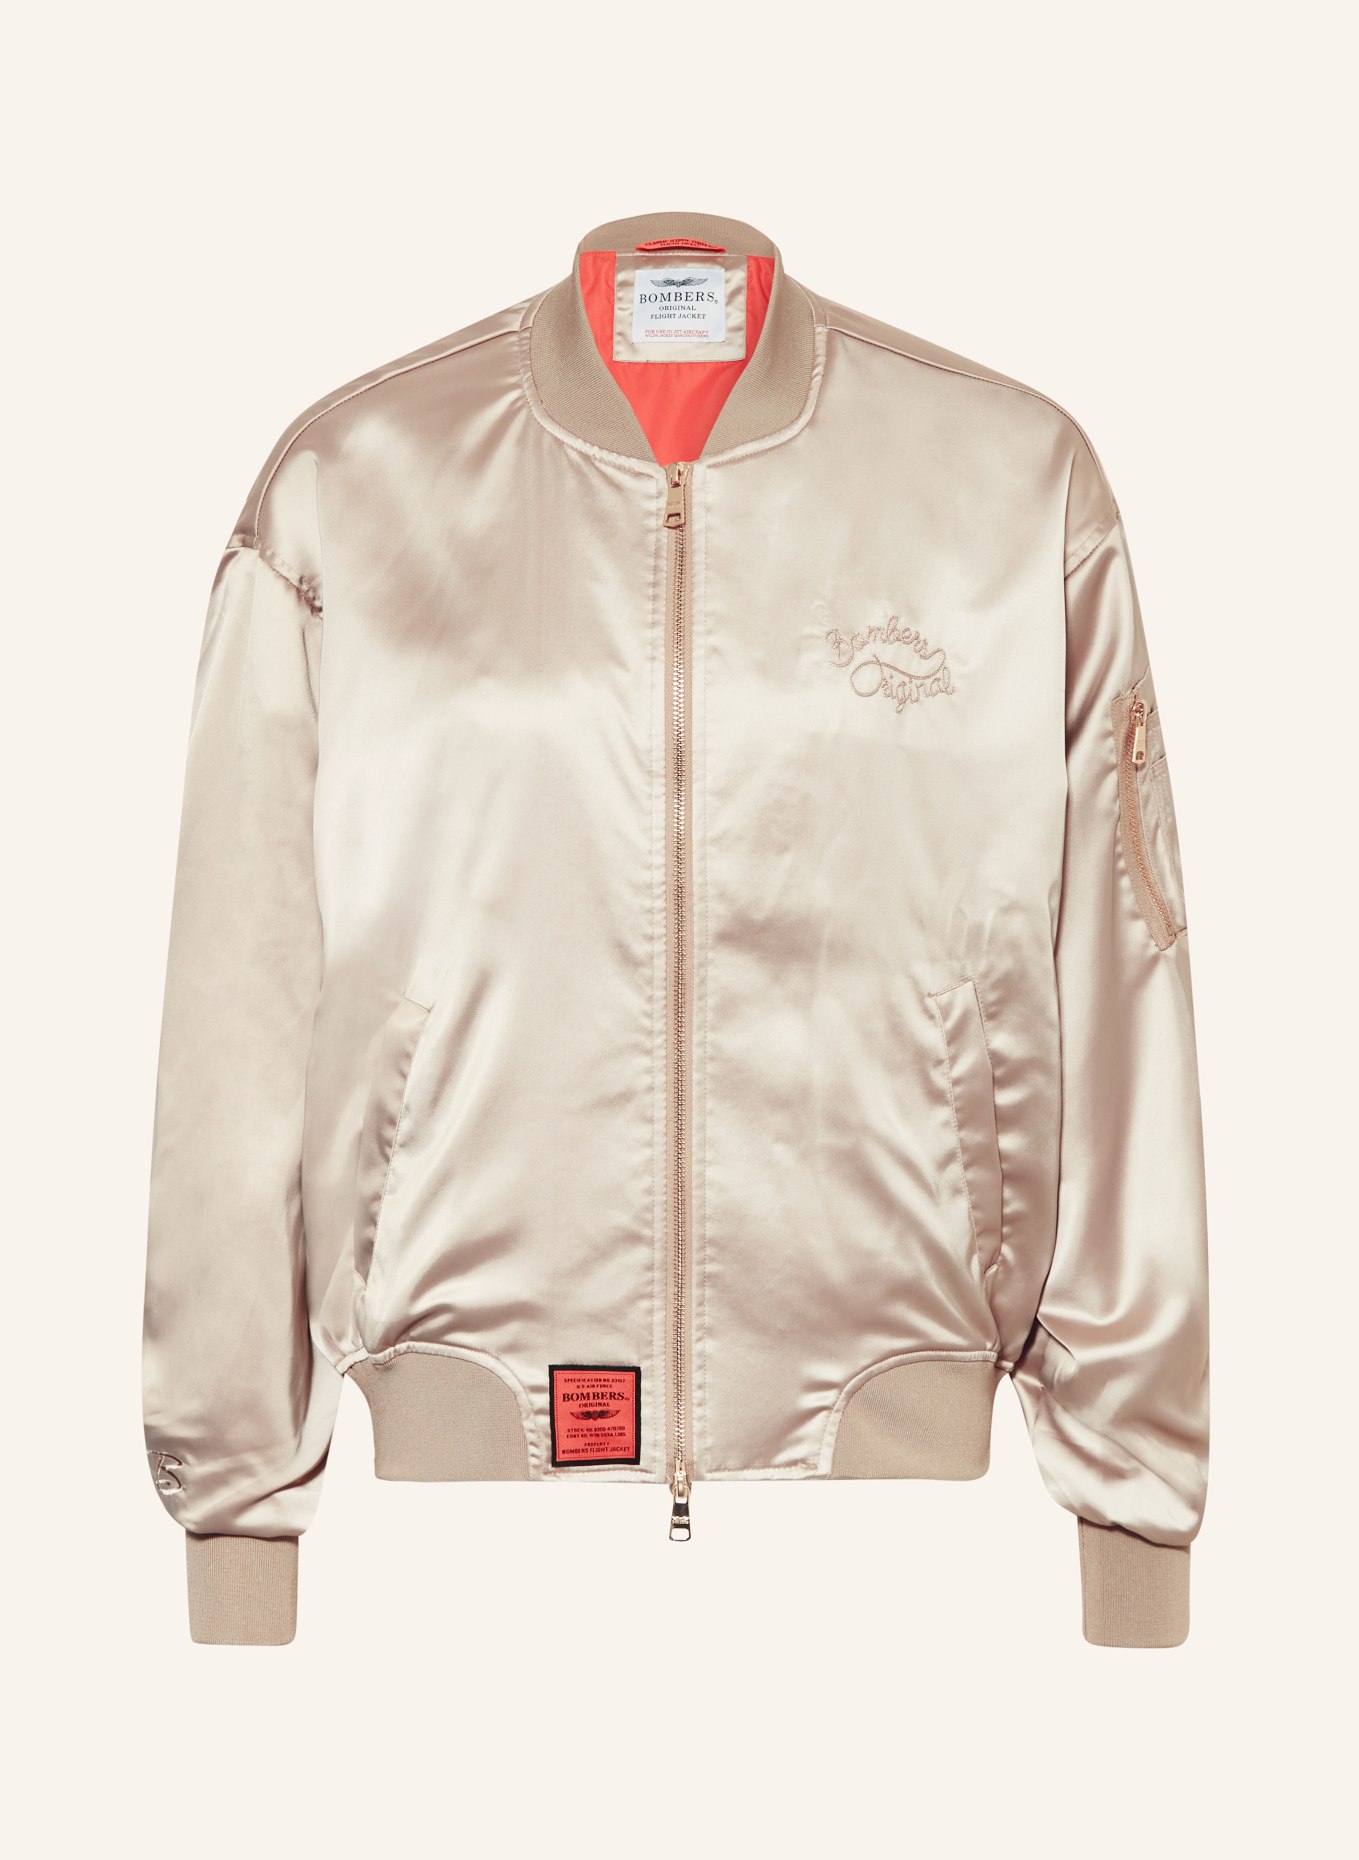 ORIGINAL BOMBERS Bomber jacket, Color: TAUPE (Image 1)